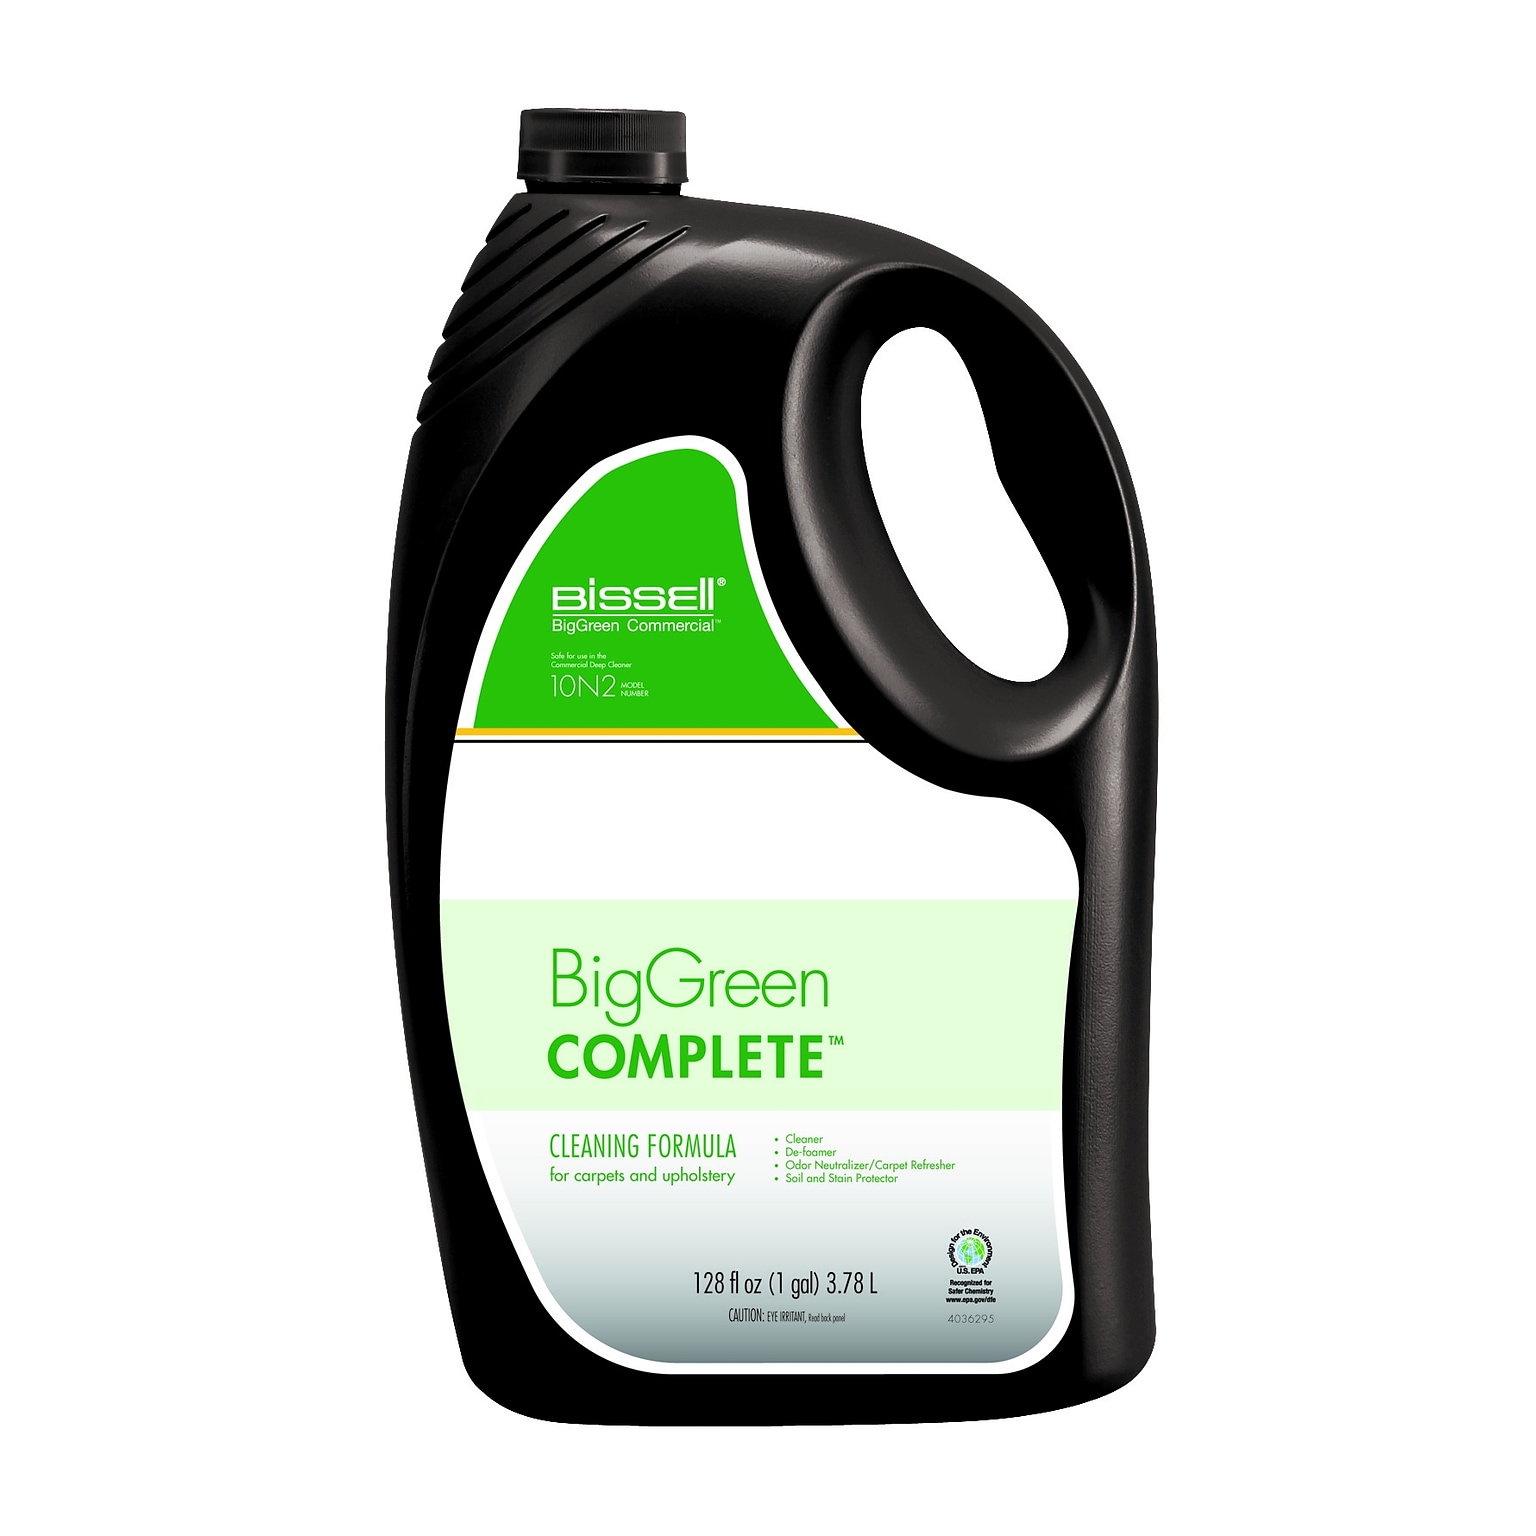 Bissell Commercial Big Green Complete Carpet and Upholstery Cleaner, 128 Oz. (31B6)